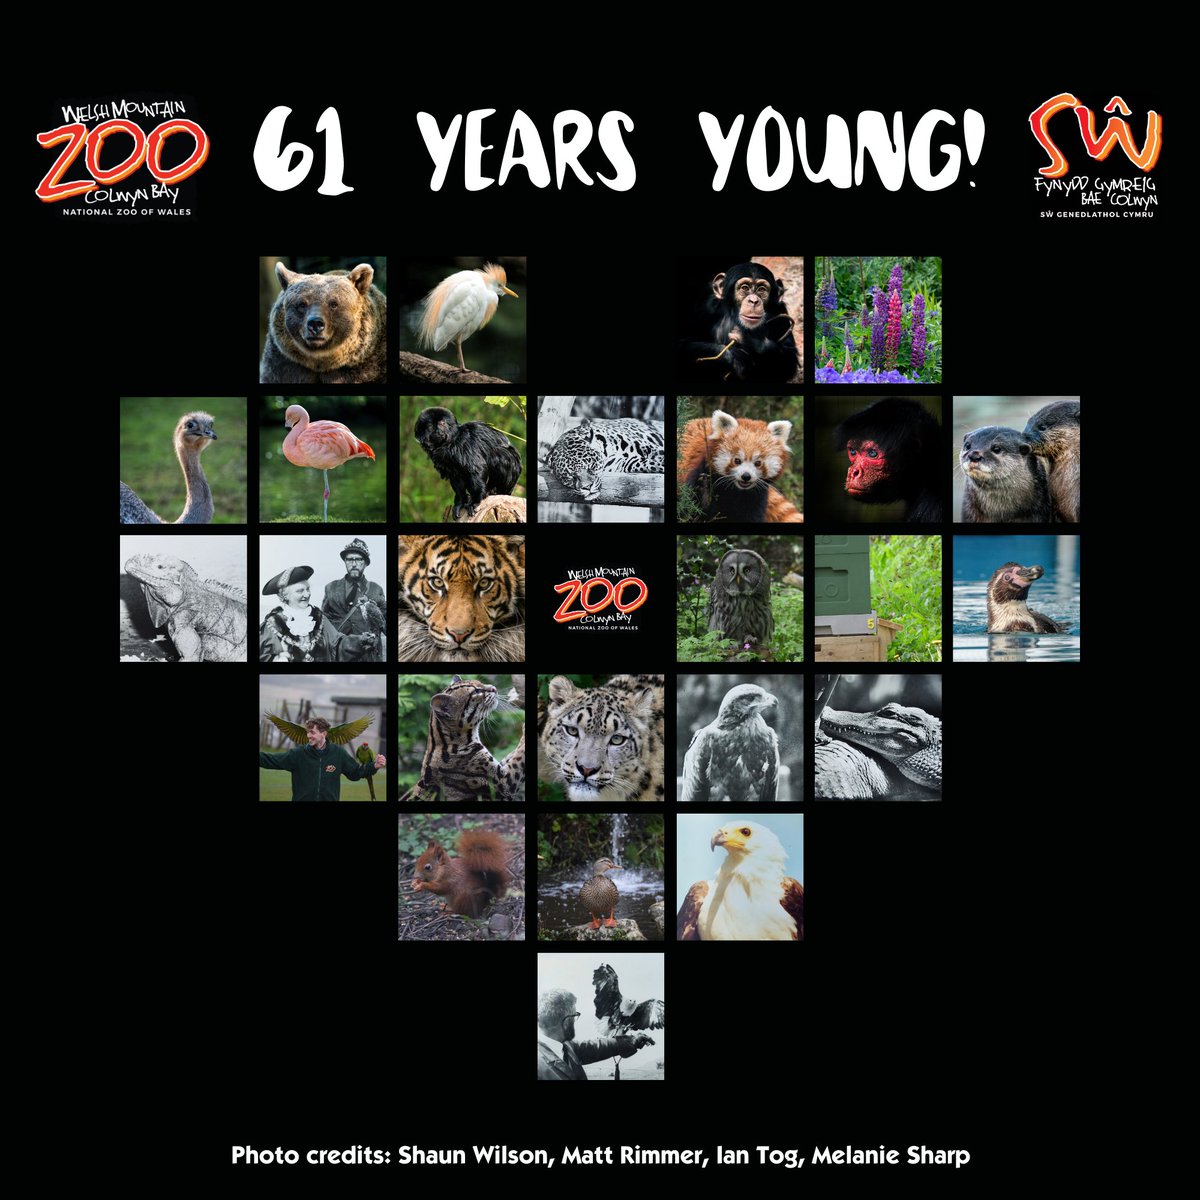 🥳 #WelshMountainZoo is 61 years young! 🥳 Since 1963 we’ve been working diligently to make WMZ the place where conservation comes to life! What are your fav' memories of the Zoo? Like, retweet & comment below for the chance to win an Animal Adoption! welshmountainzoo.org/competition-te…